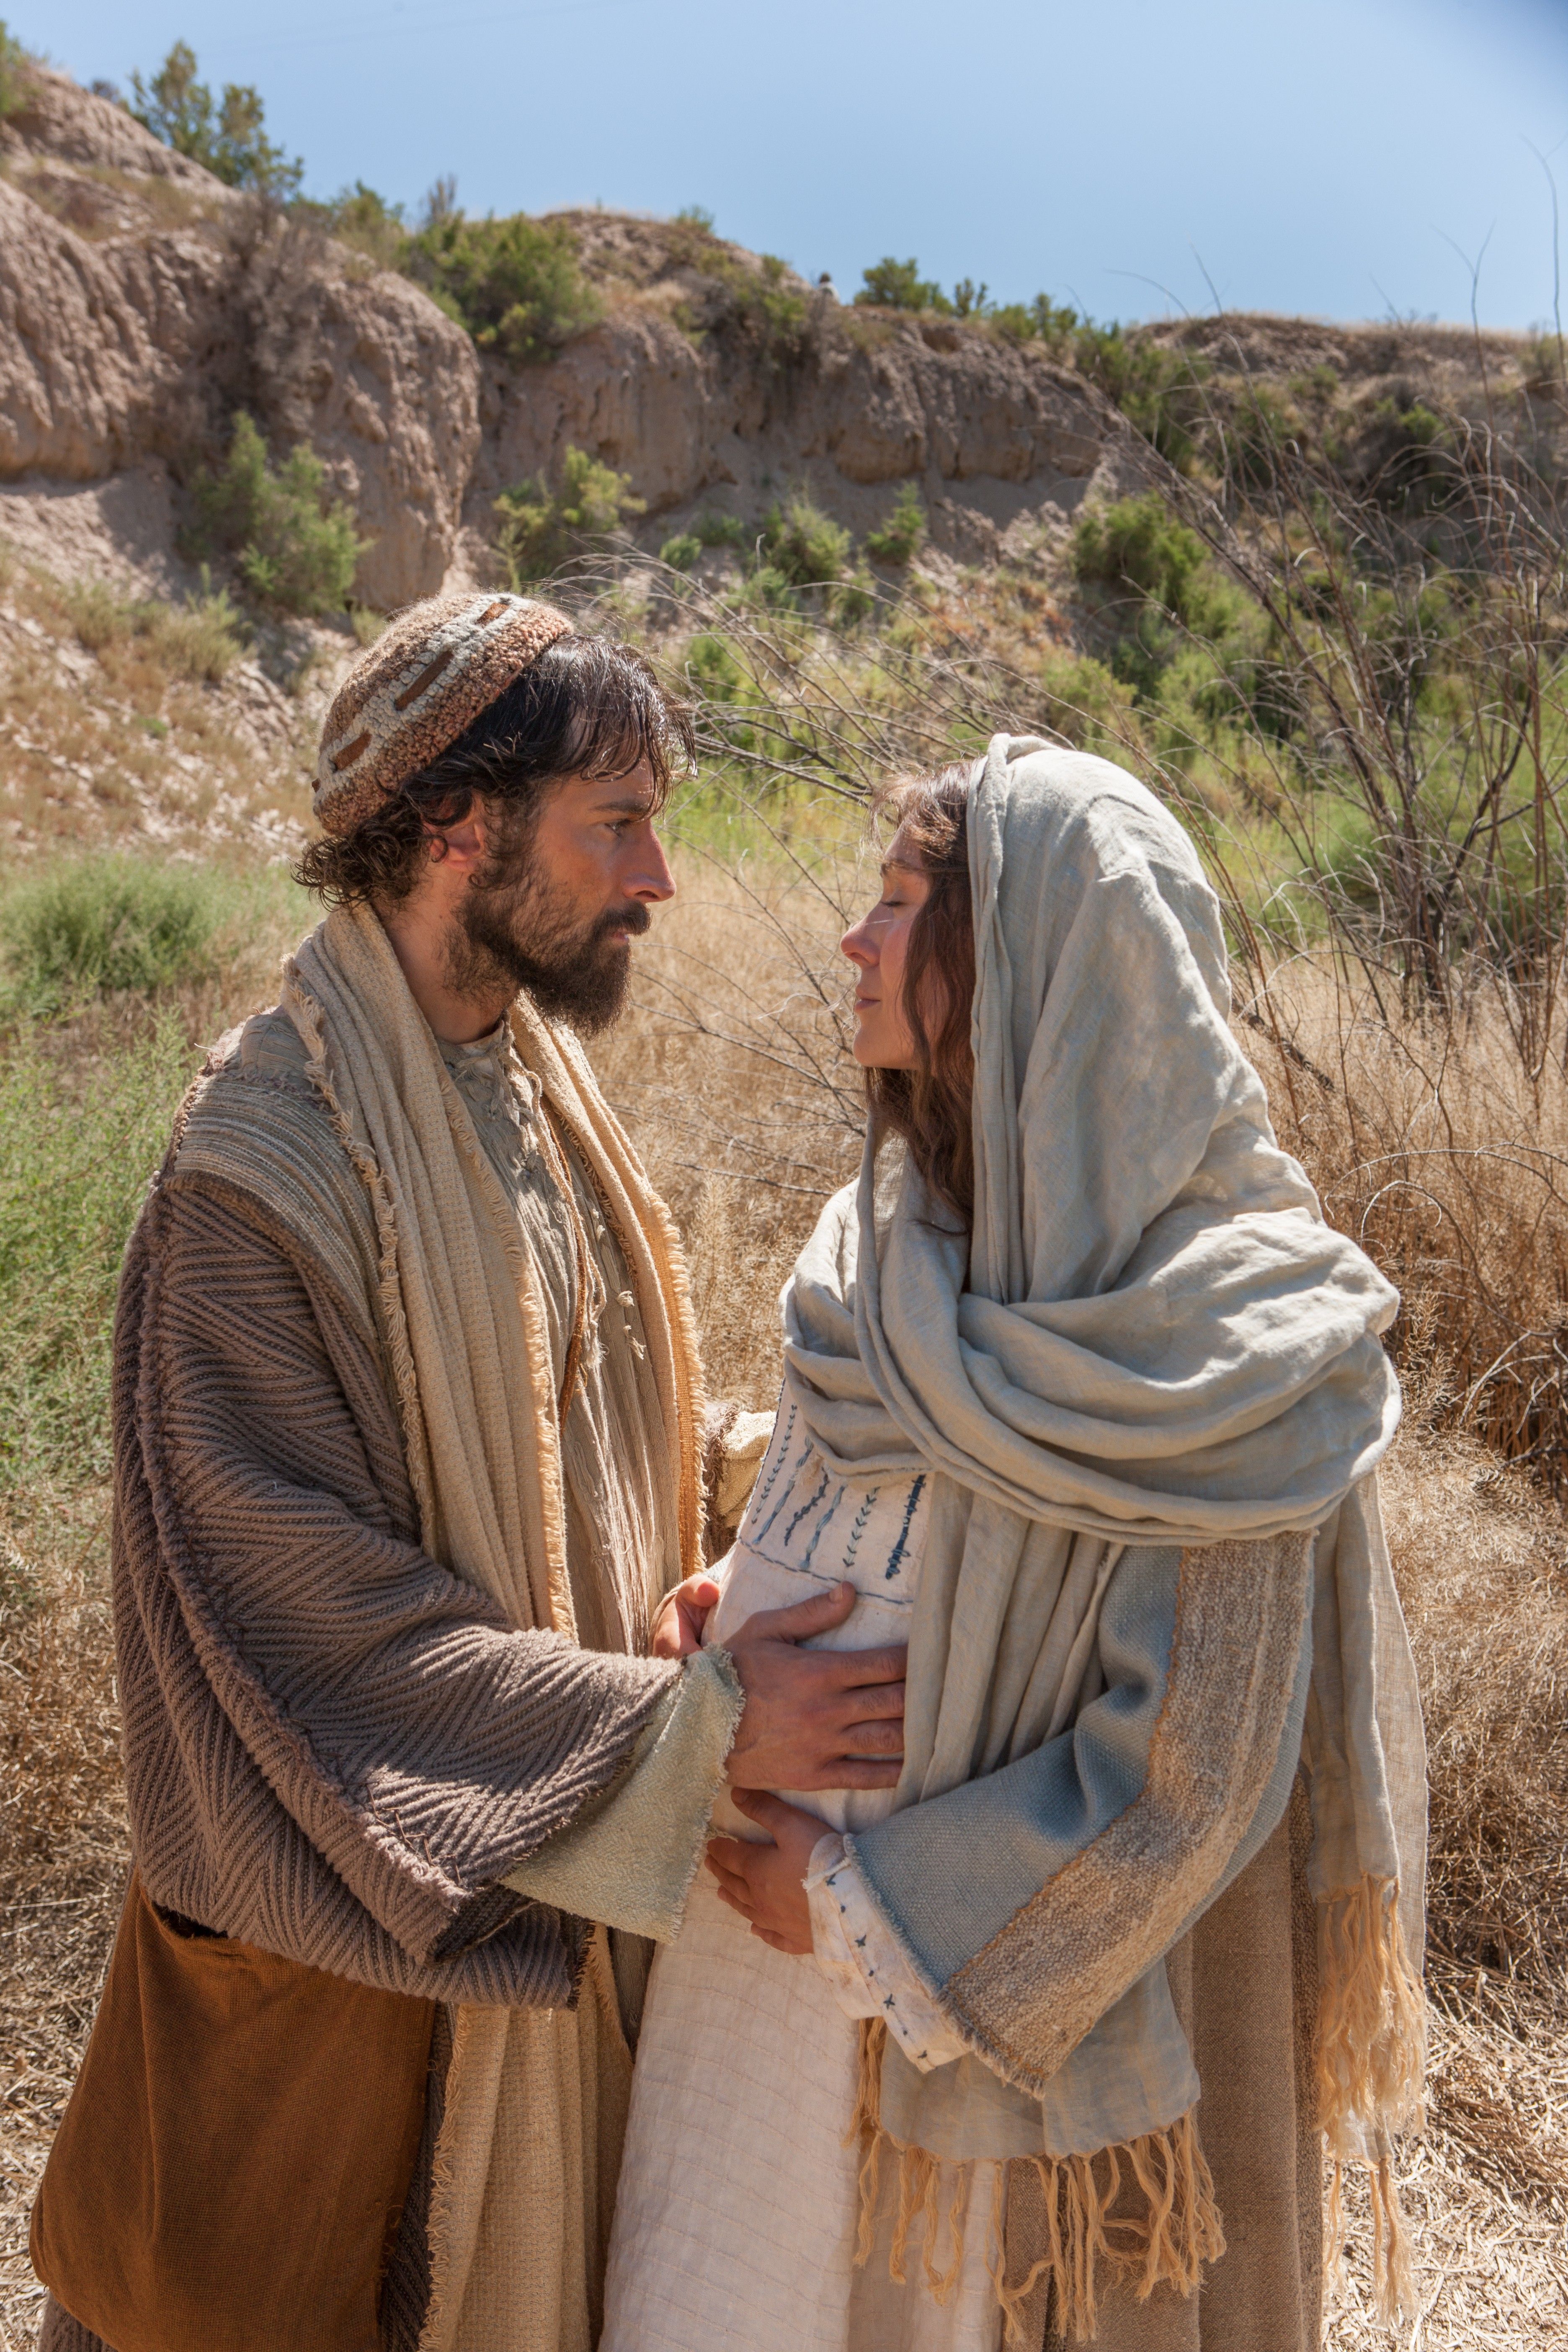 Mary and Joseph stop to rest on their journey to Bethlehem.